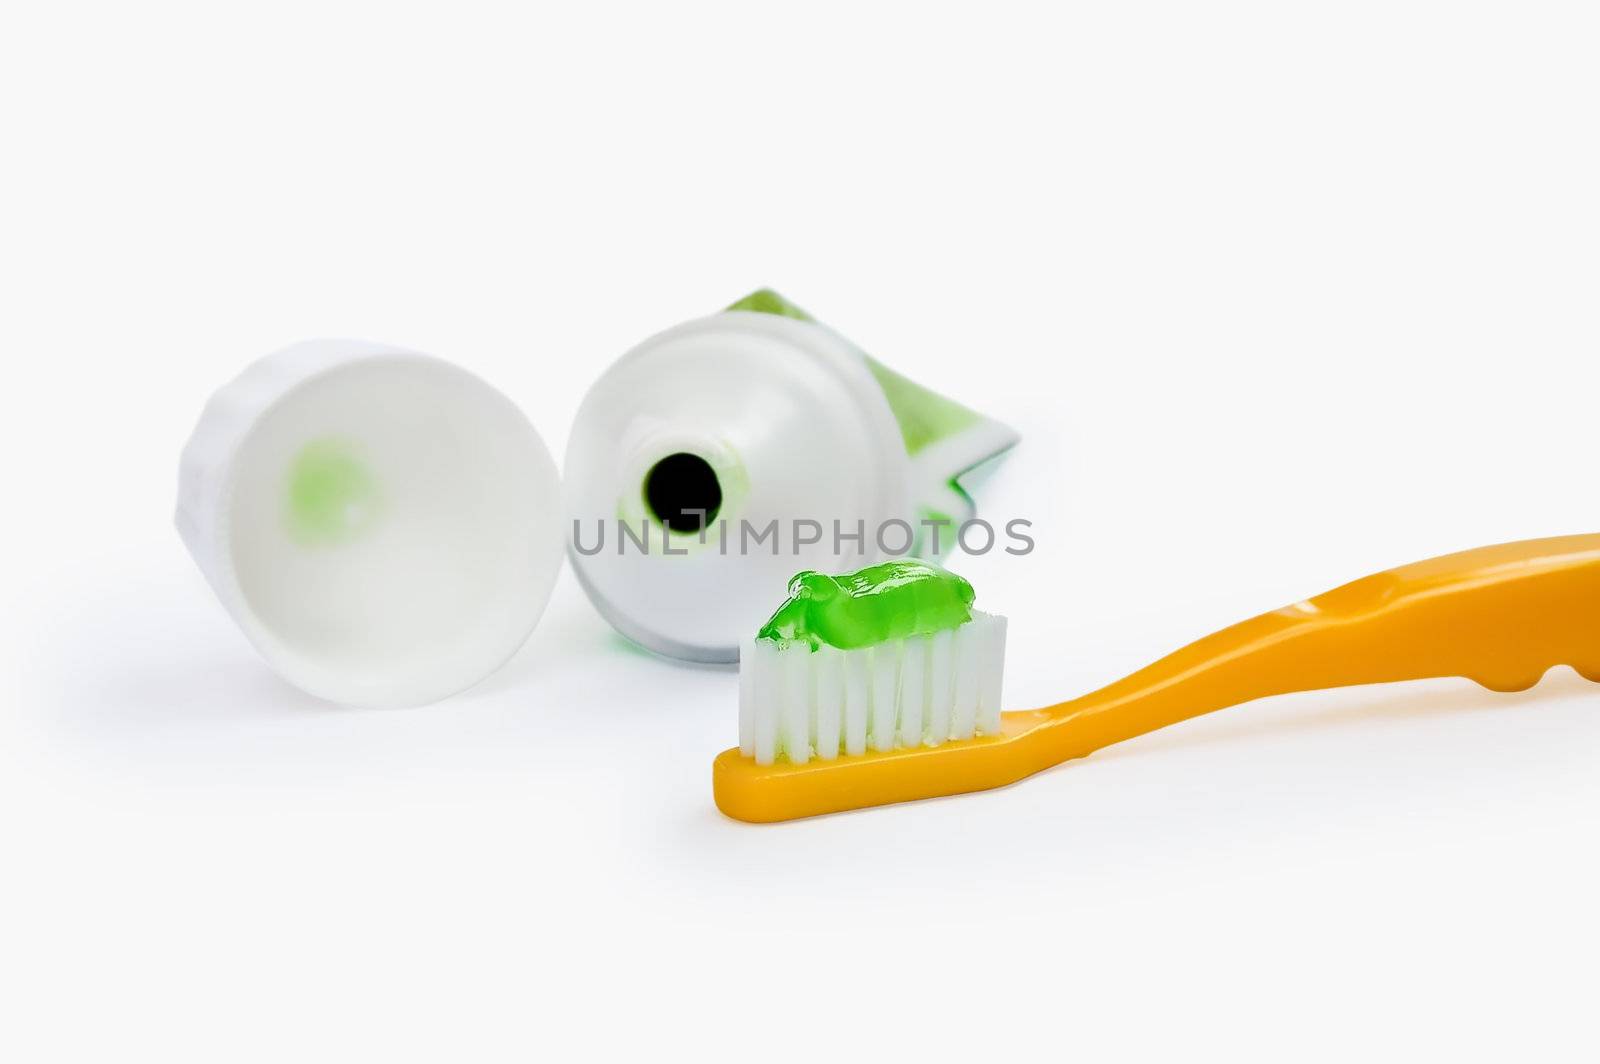 Yellow toothbrush with a green transparent toothpaste tubes open cover isolated on white background